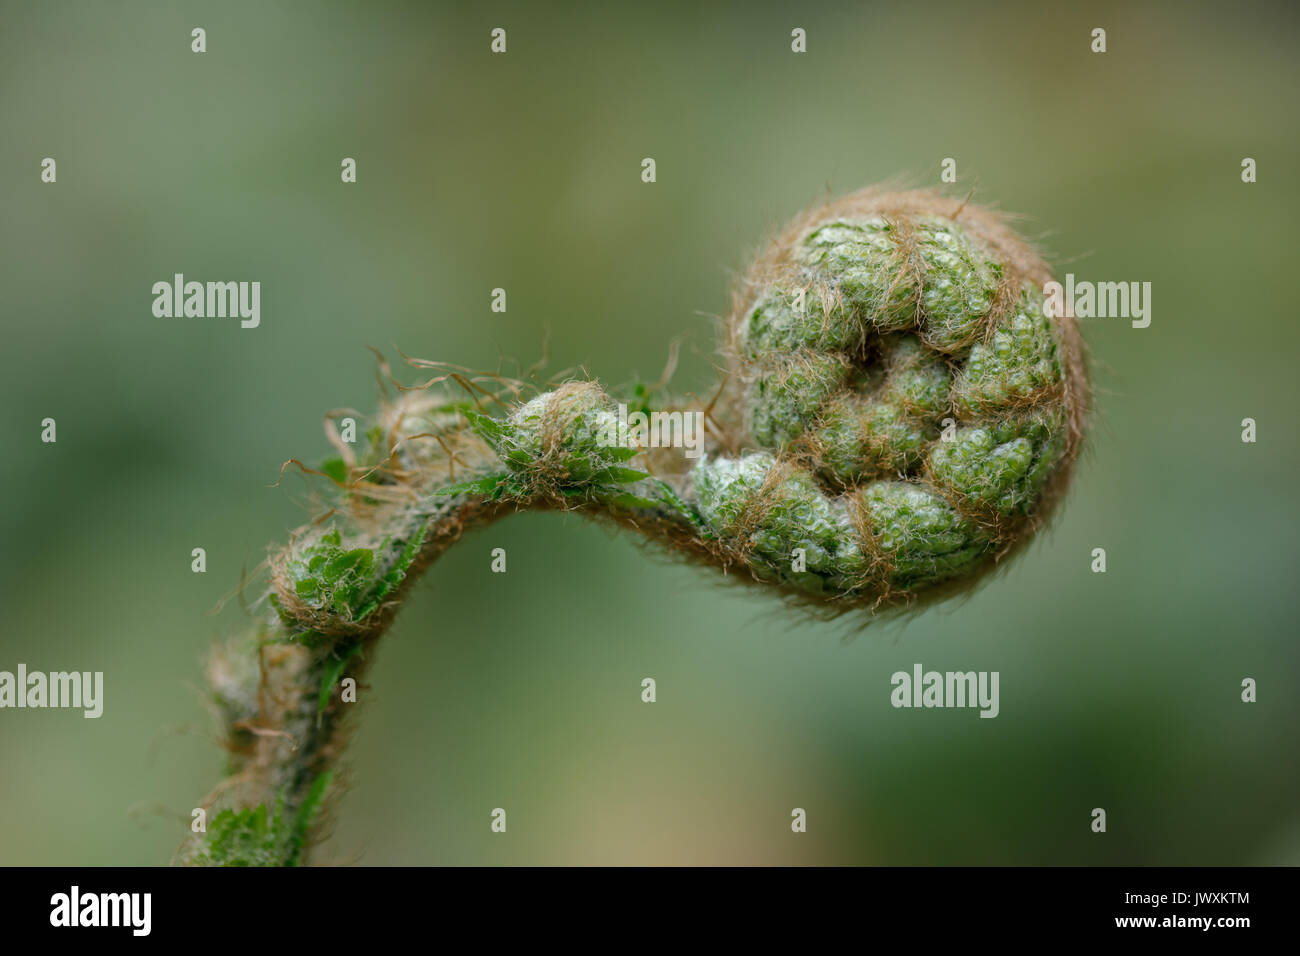 New frond of a Polystichum polyblepharum fern with a soft bokeh background Stock Photo